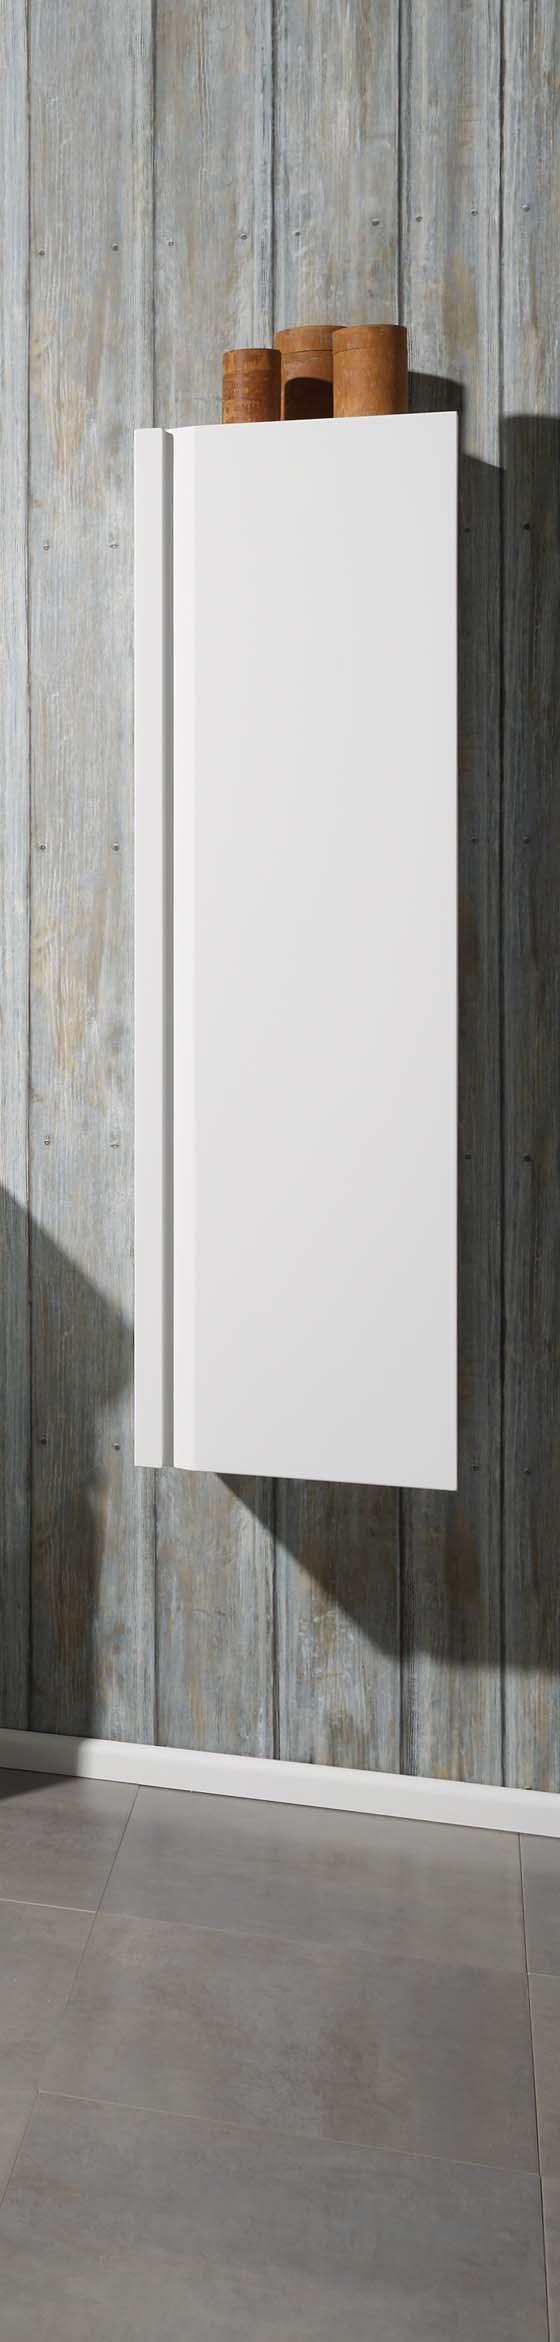 washstand with doors, in stunning driftwood, mali and high gloss white finishes.